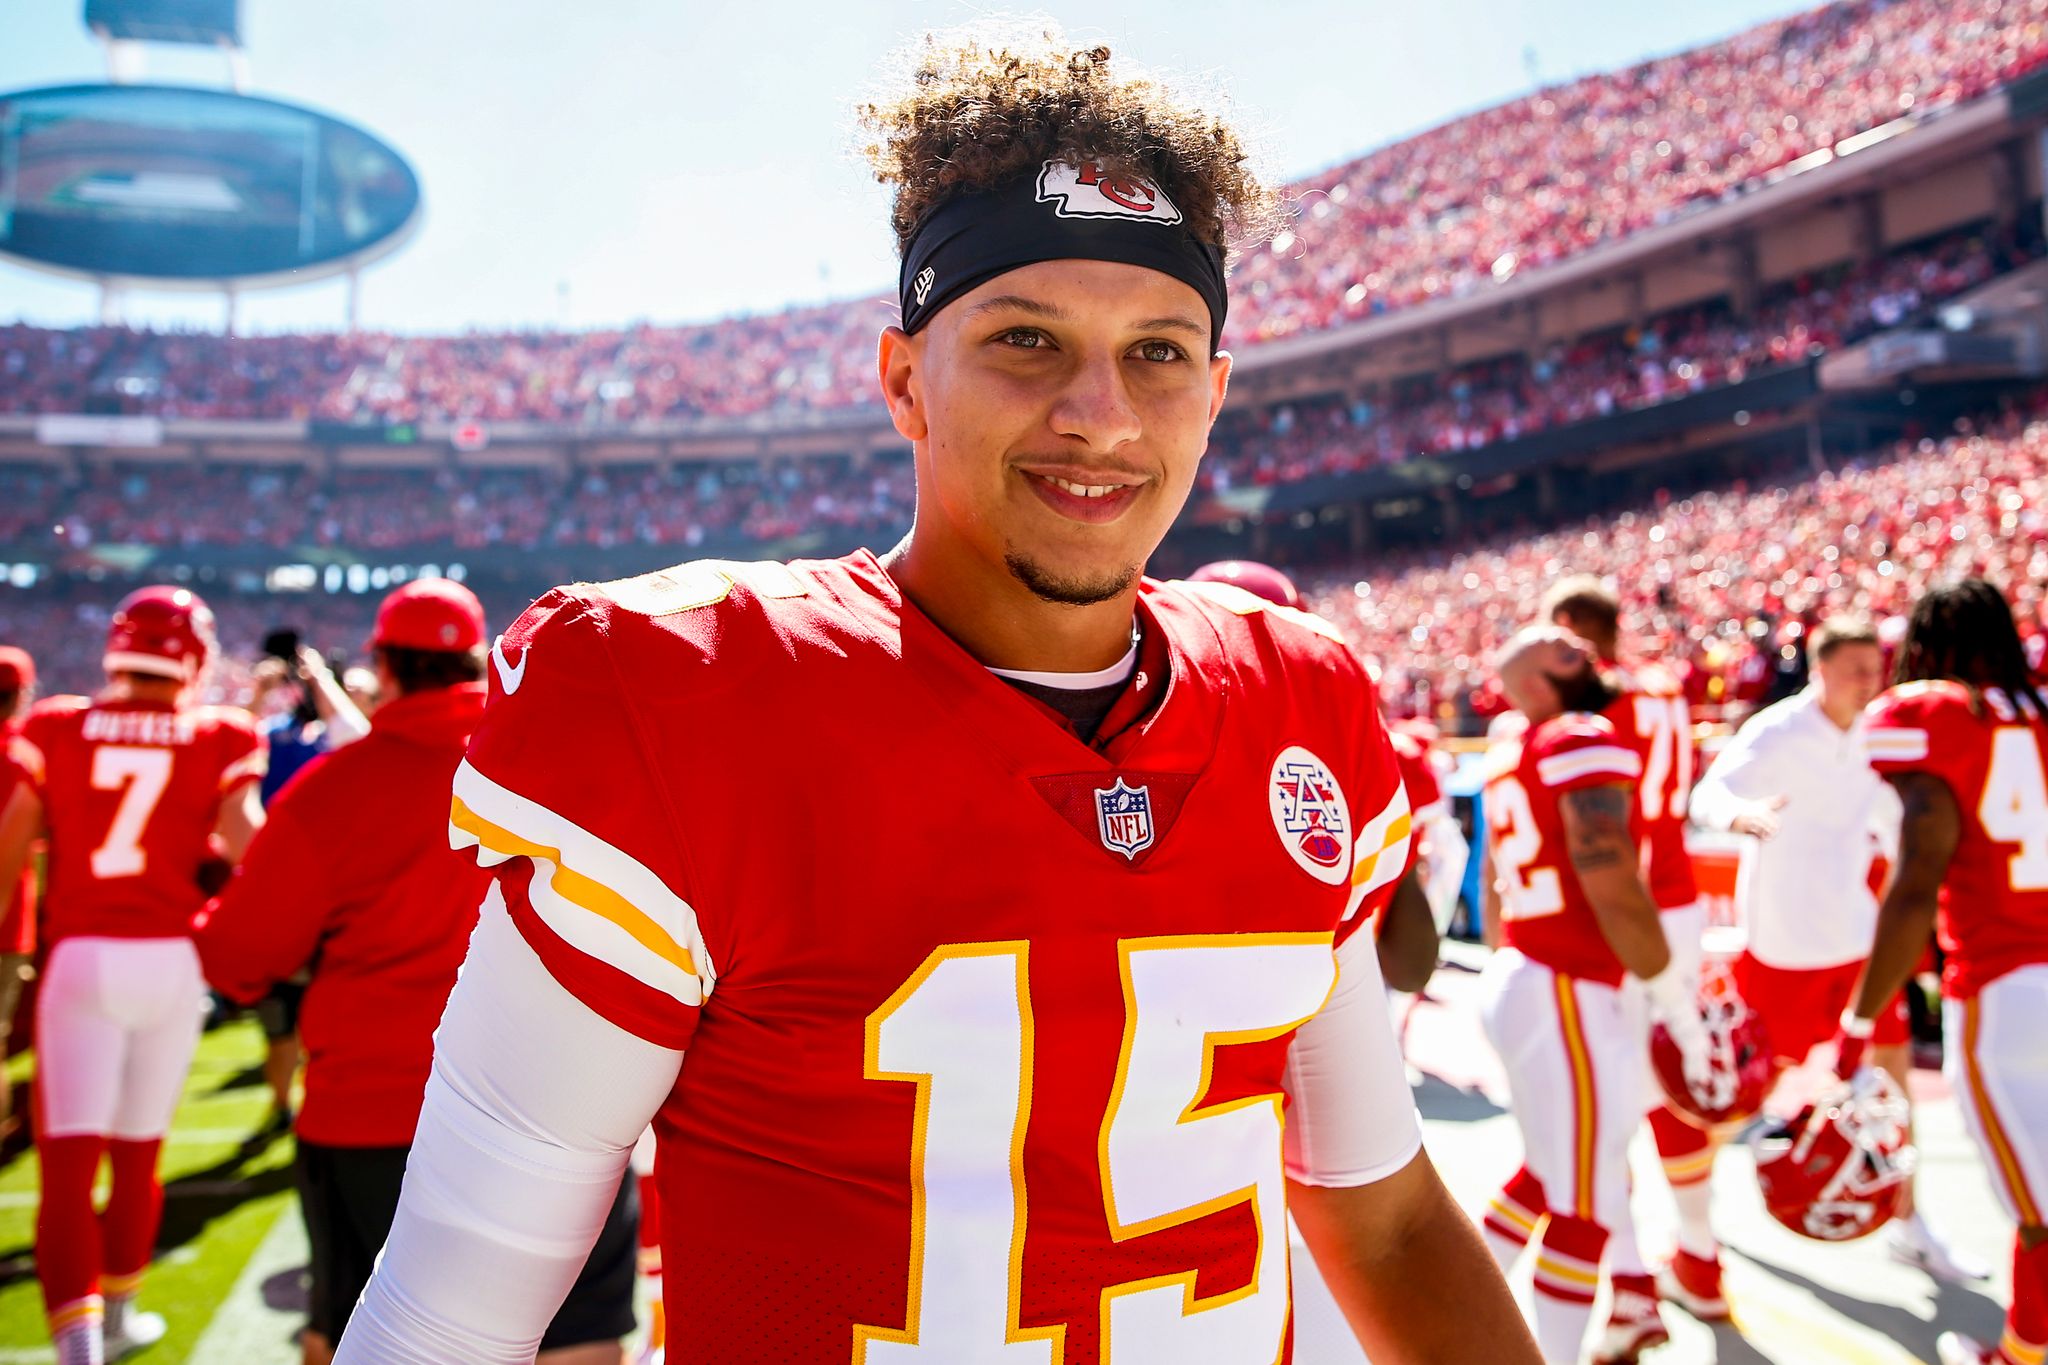 Patrick Mahomes #15 of the Kansas City Chiefs smiles on the sidelines before the start of the game against the San Francisco 49ers at Arrowhead Stadium on September 23rd, 2018 in Kansas City, Missouri | Photo: Getty Images